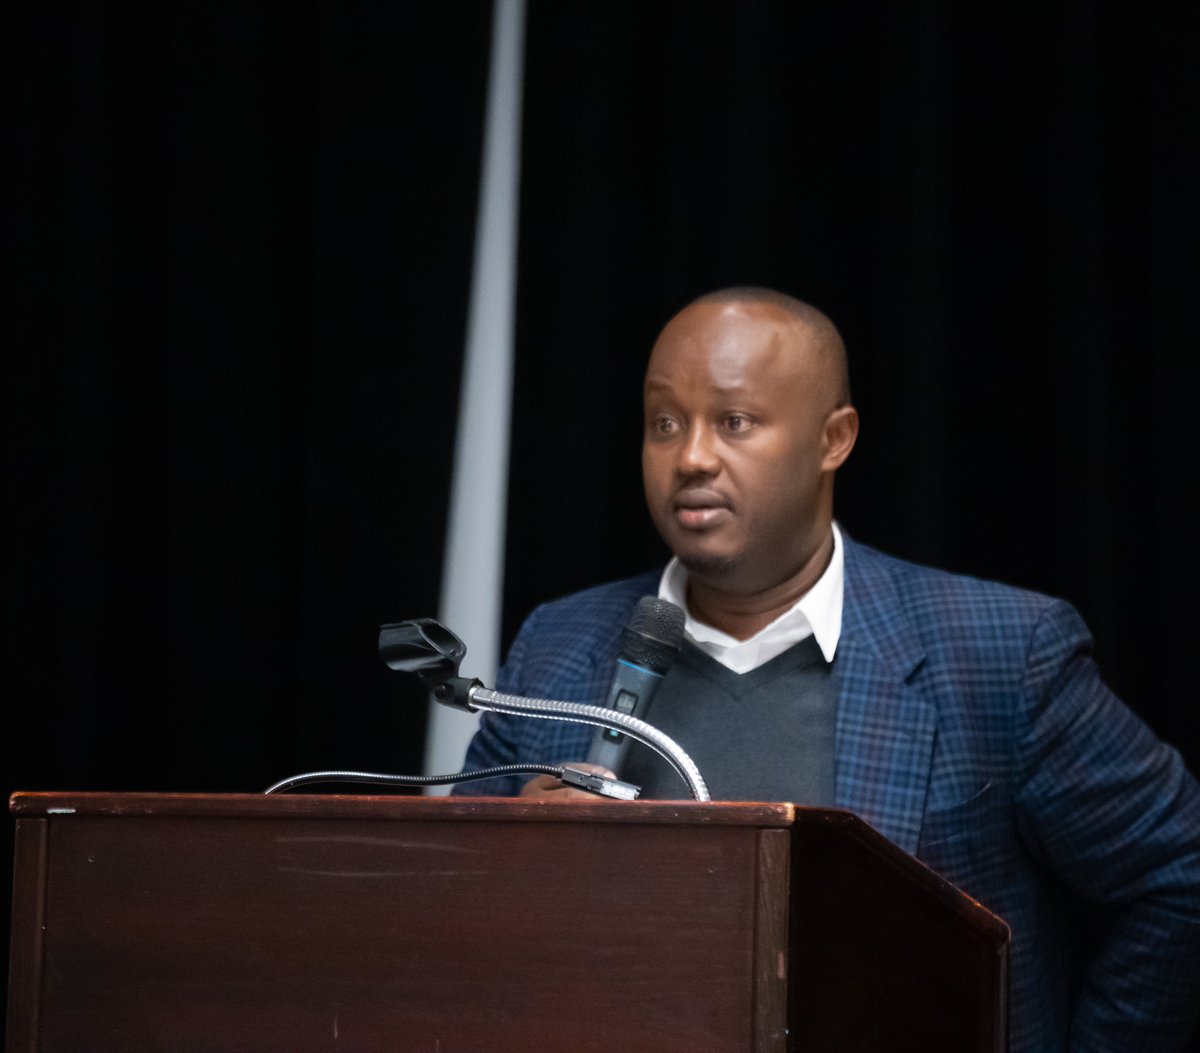 Moses Ndahiro from @Leaders_Pray commended #Rwanda 's leadership for transforming the country, guided by divine grace: 'We’ve seen Rwandan people receive education, healthcare irrespective of who they’re. We’ve seen people move from despair to hope, move from dependency to…